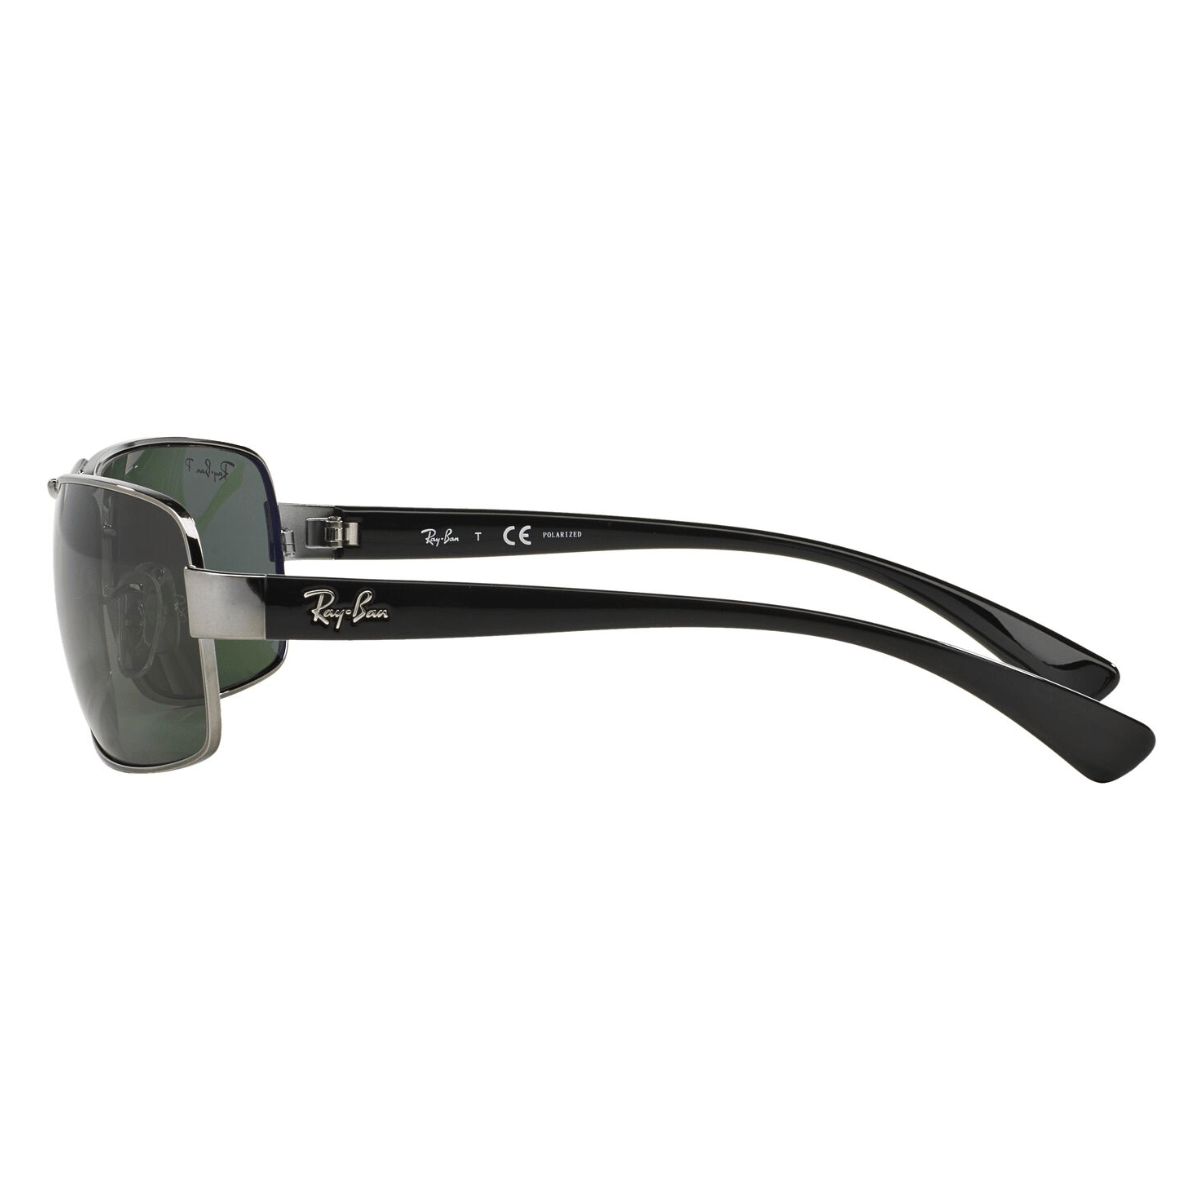 "Shop the latest in eye protection with Ray-Ban 3379's polarized green lenses and sleek gunmetal frames, perfect for any gender at Optorium."